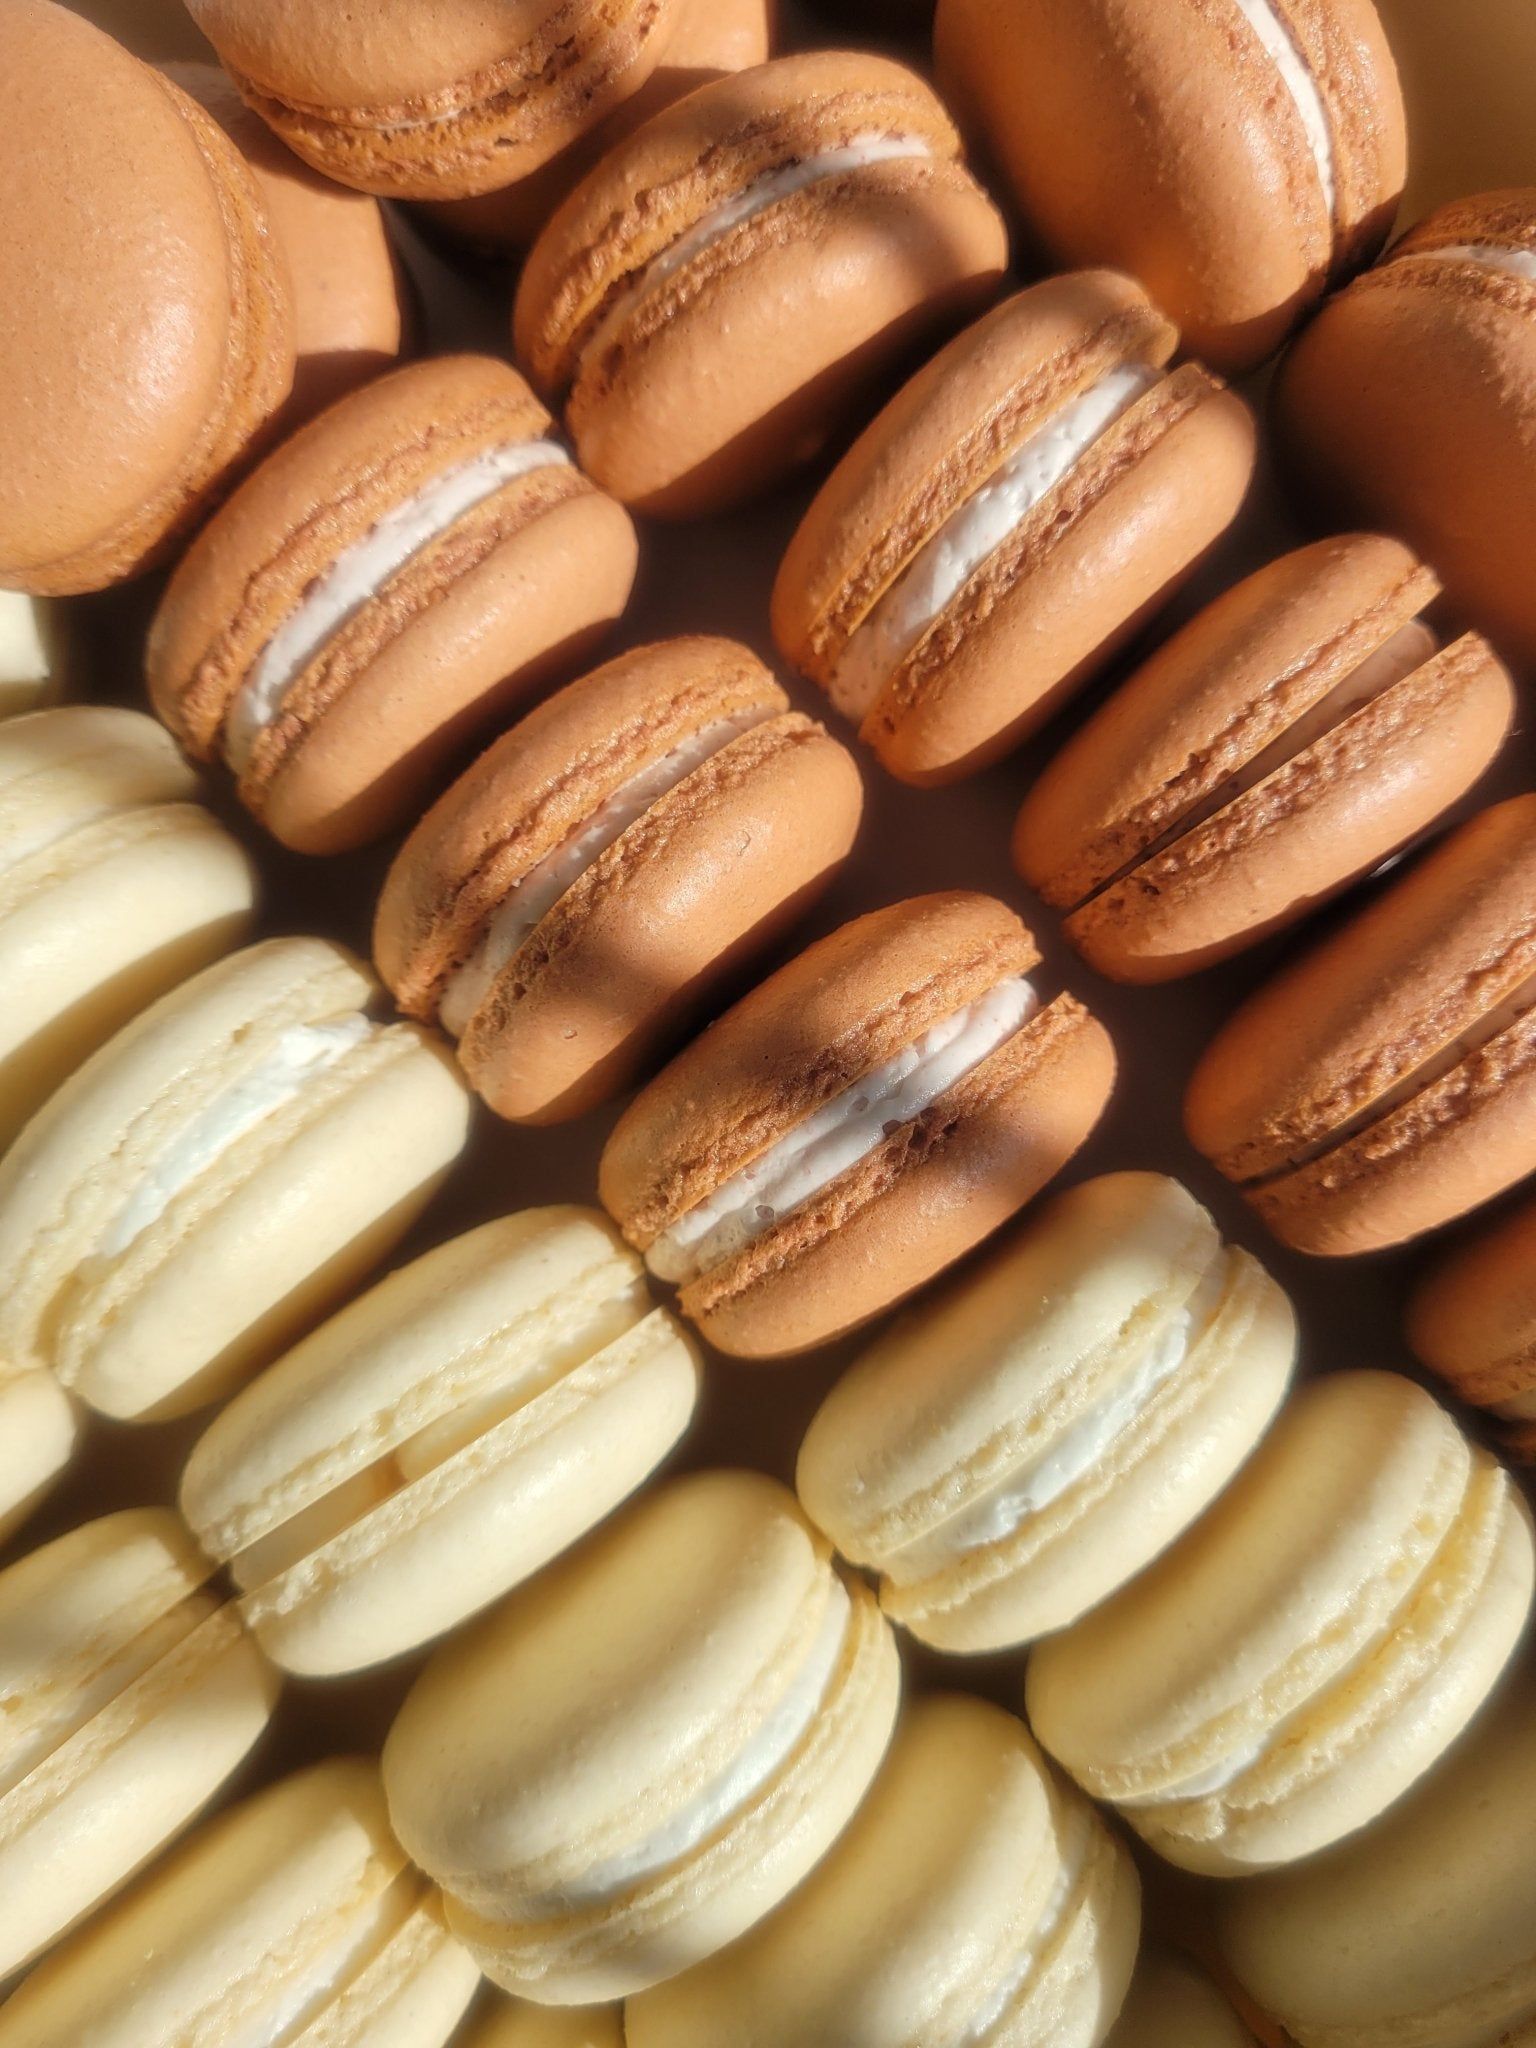 A plate of macarons in shades of brown and yellow. - Bakery